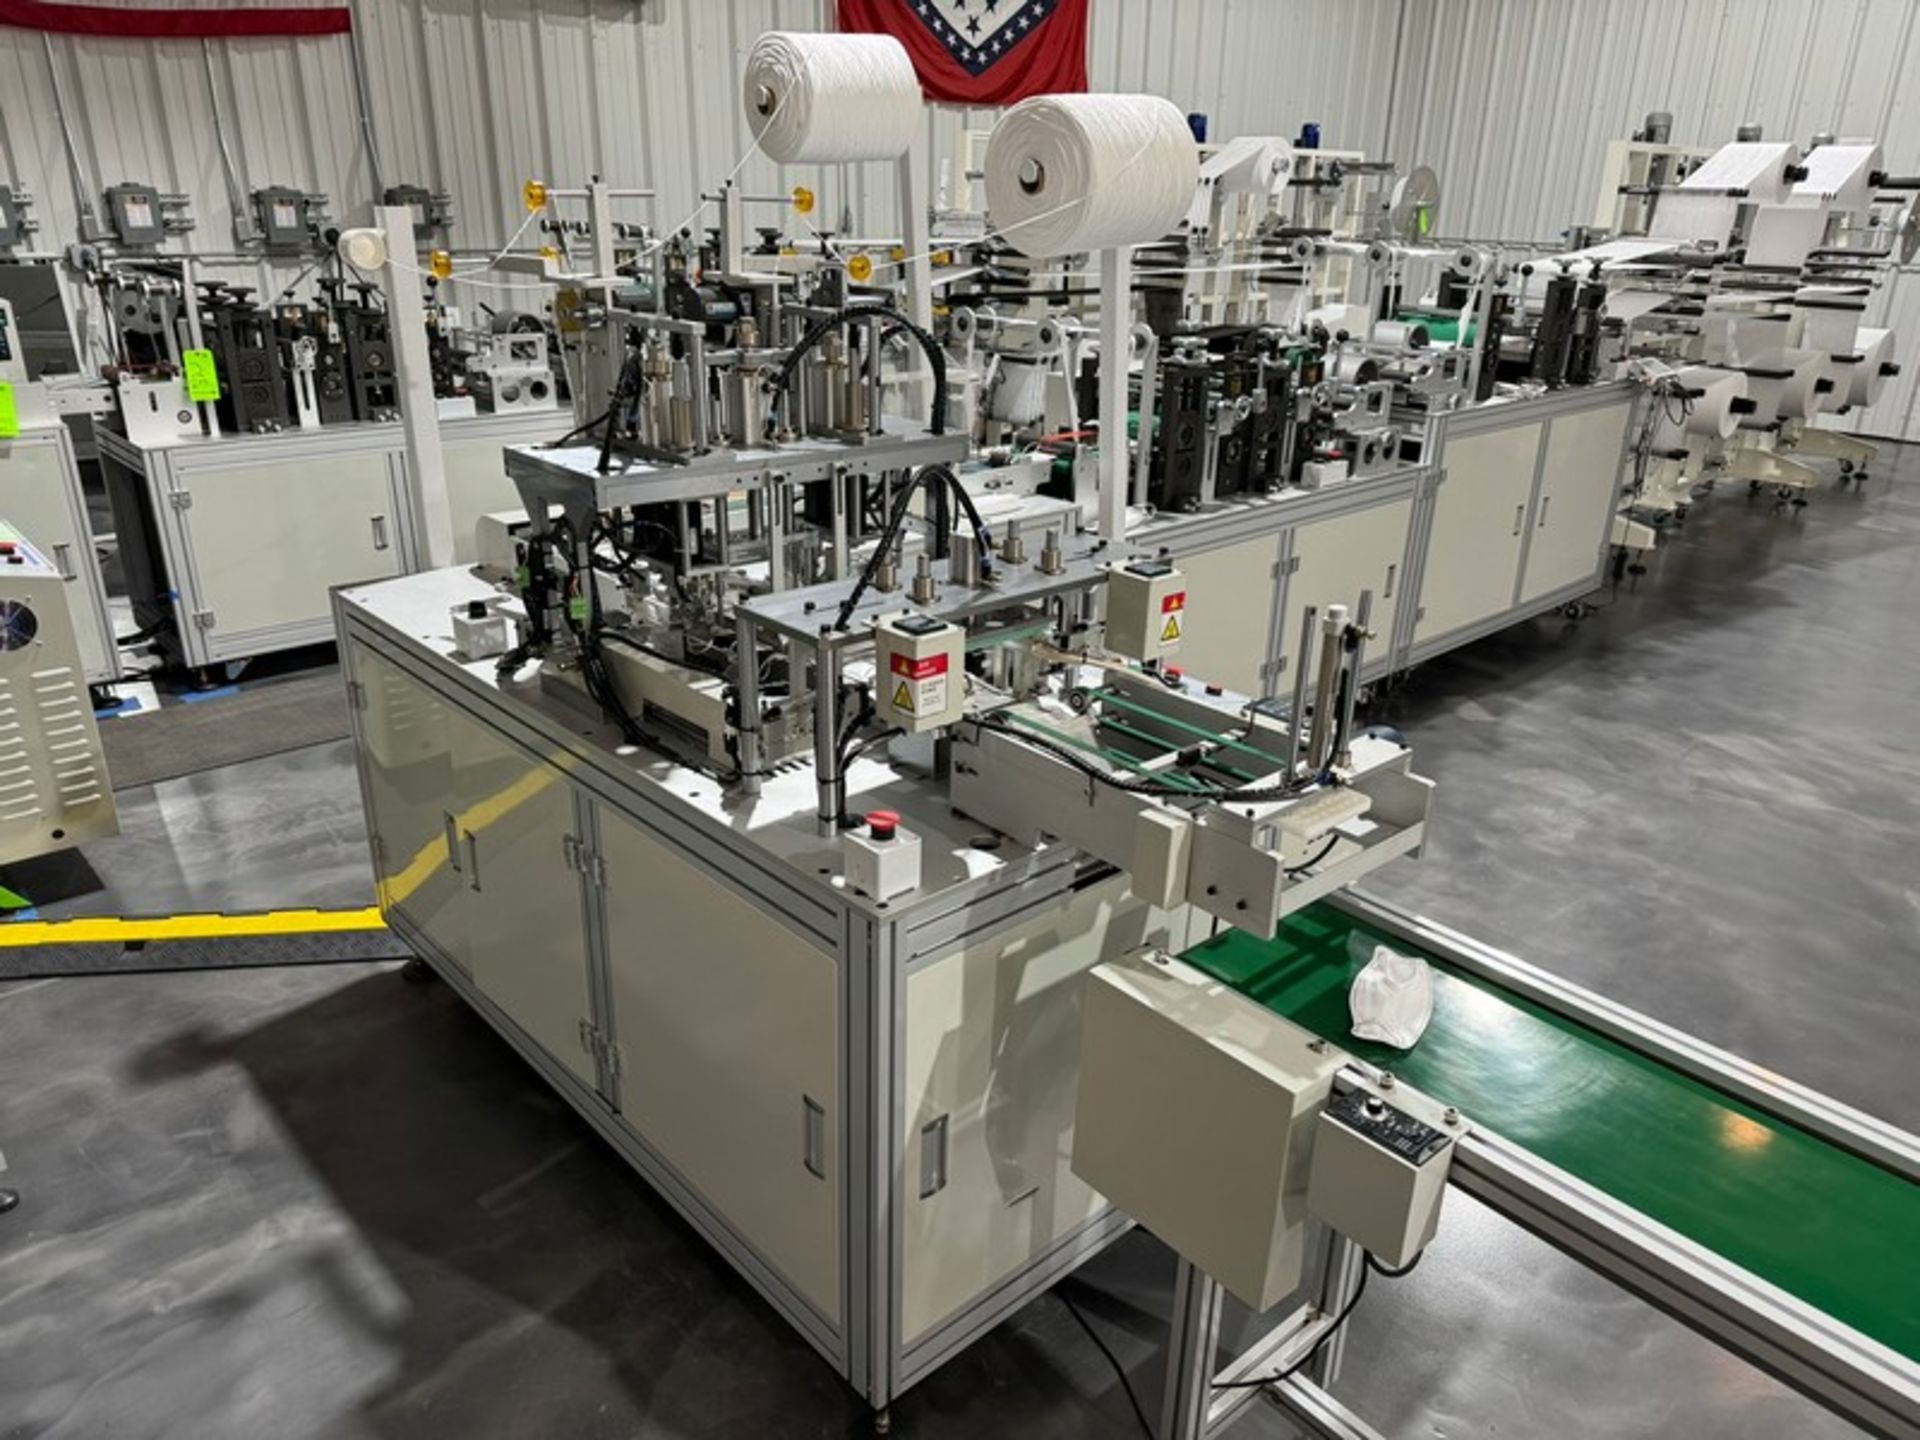 2022 KYD Automatic 6,000 Units Per Hour Mask Manufacturing Line, Includes Unwinding Station, Rolling - Image 6 of 30